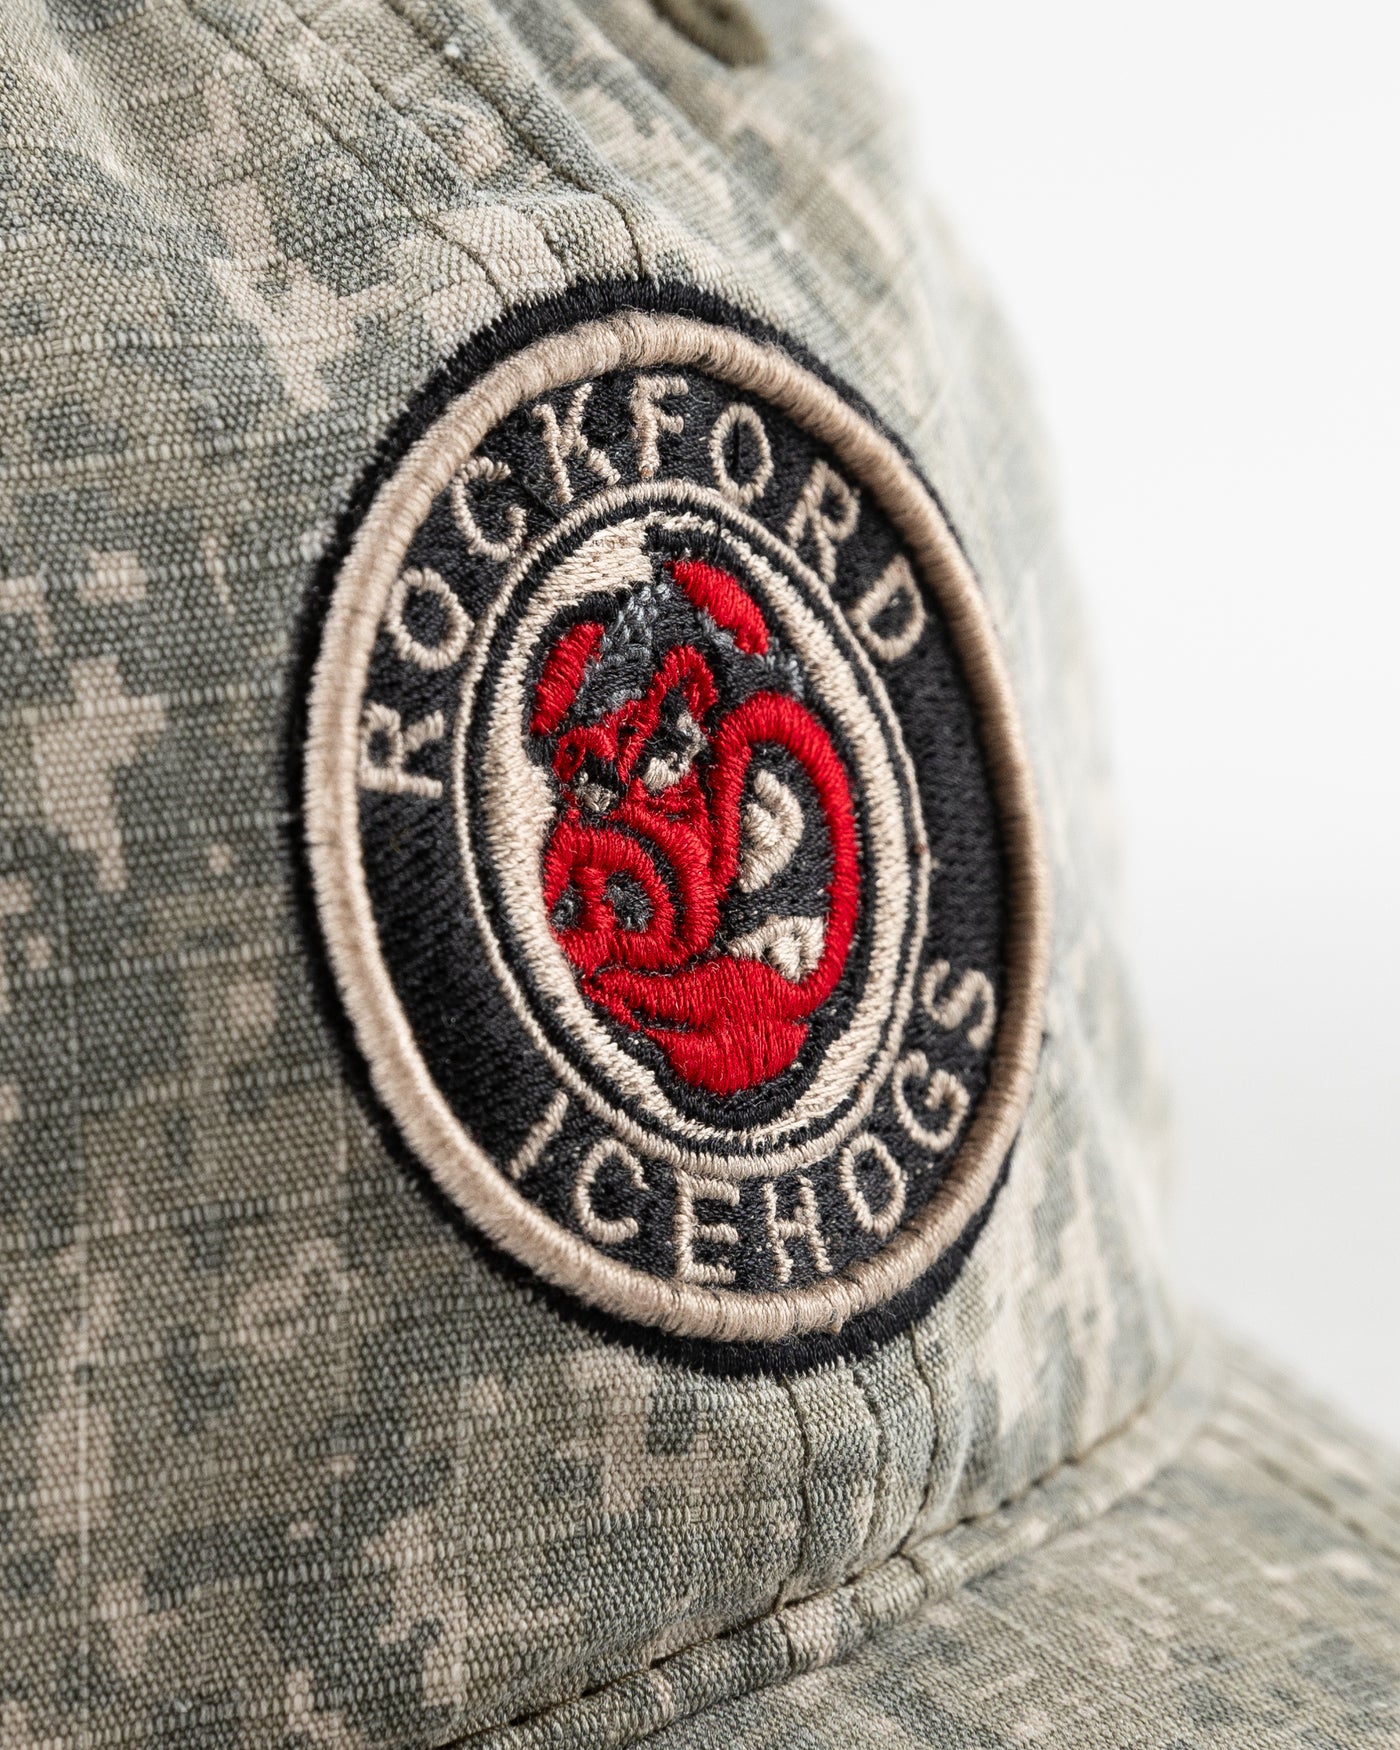 camo Rockford IceHogs adjustable cap with patch embroidered on front - detail lay flat